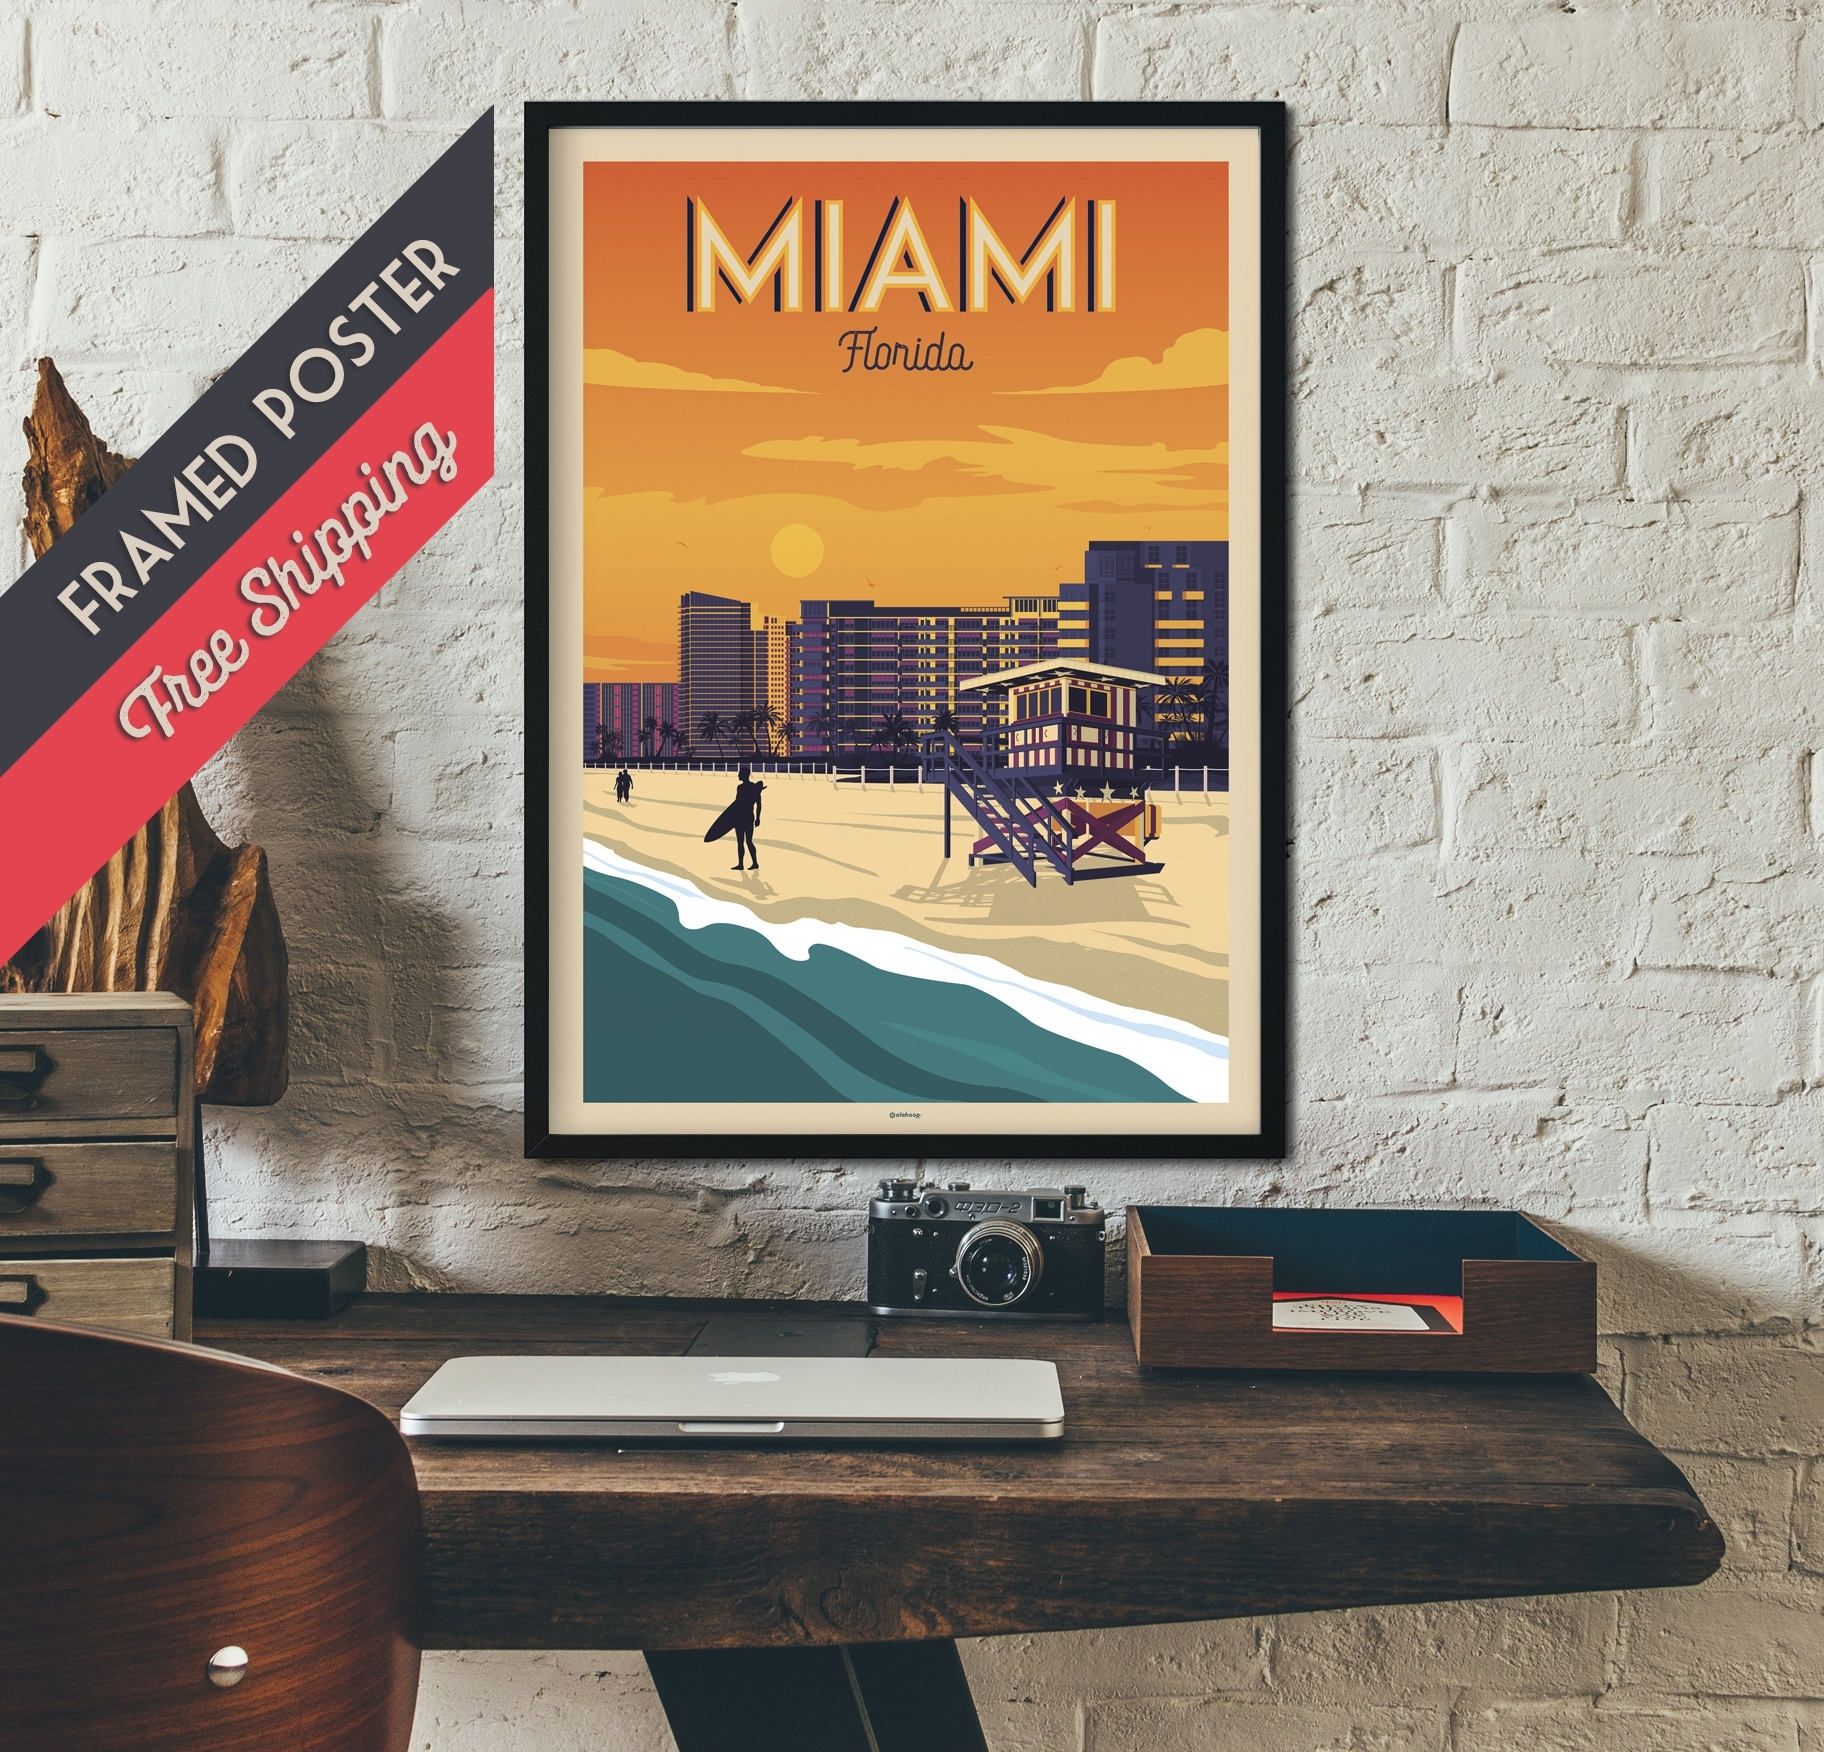 Miami – Florida – Vintage Travel Poster, Framed Poster, Wall Art Intended For Florida Wall Art (View 12 of 20)